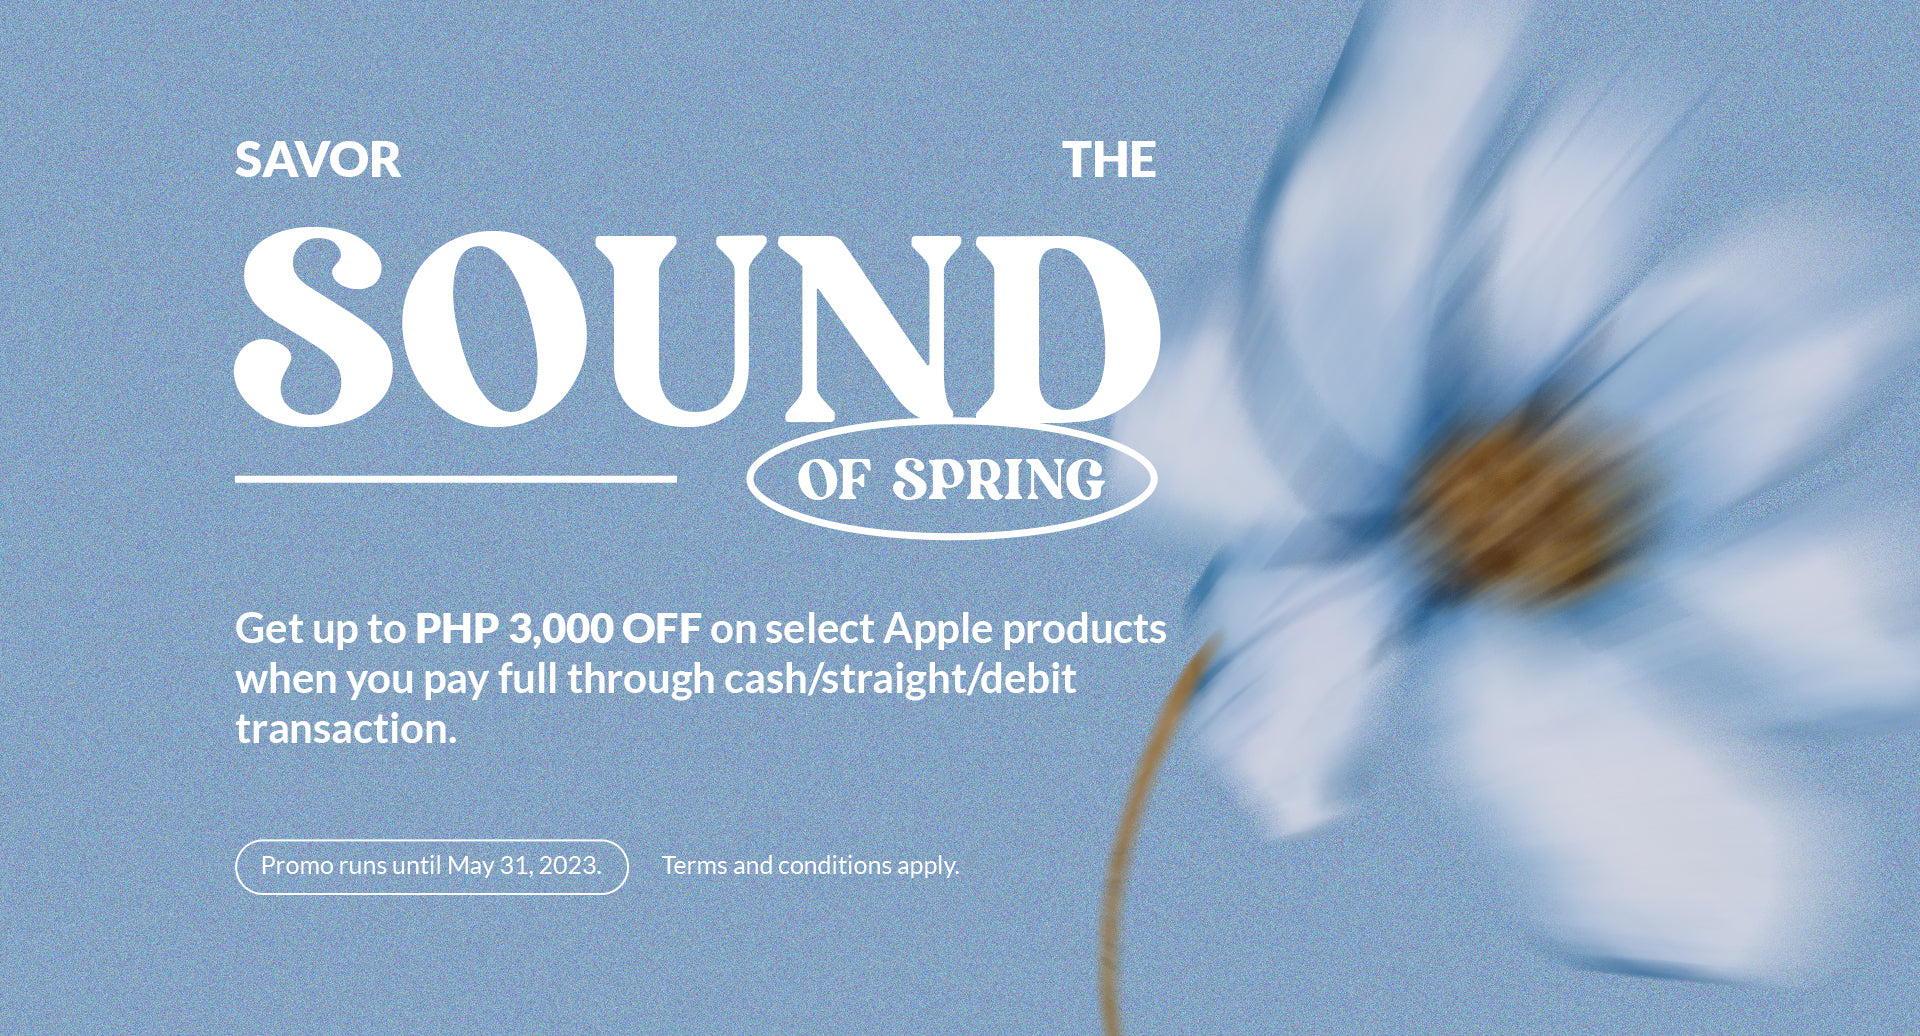 Savor the sound of spring! Get up to PHP3,000 off on select Apple products.